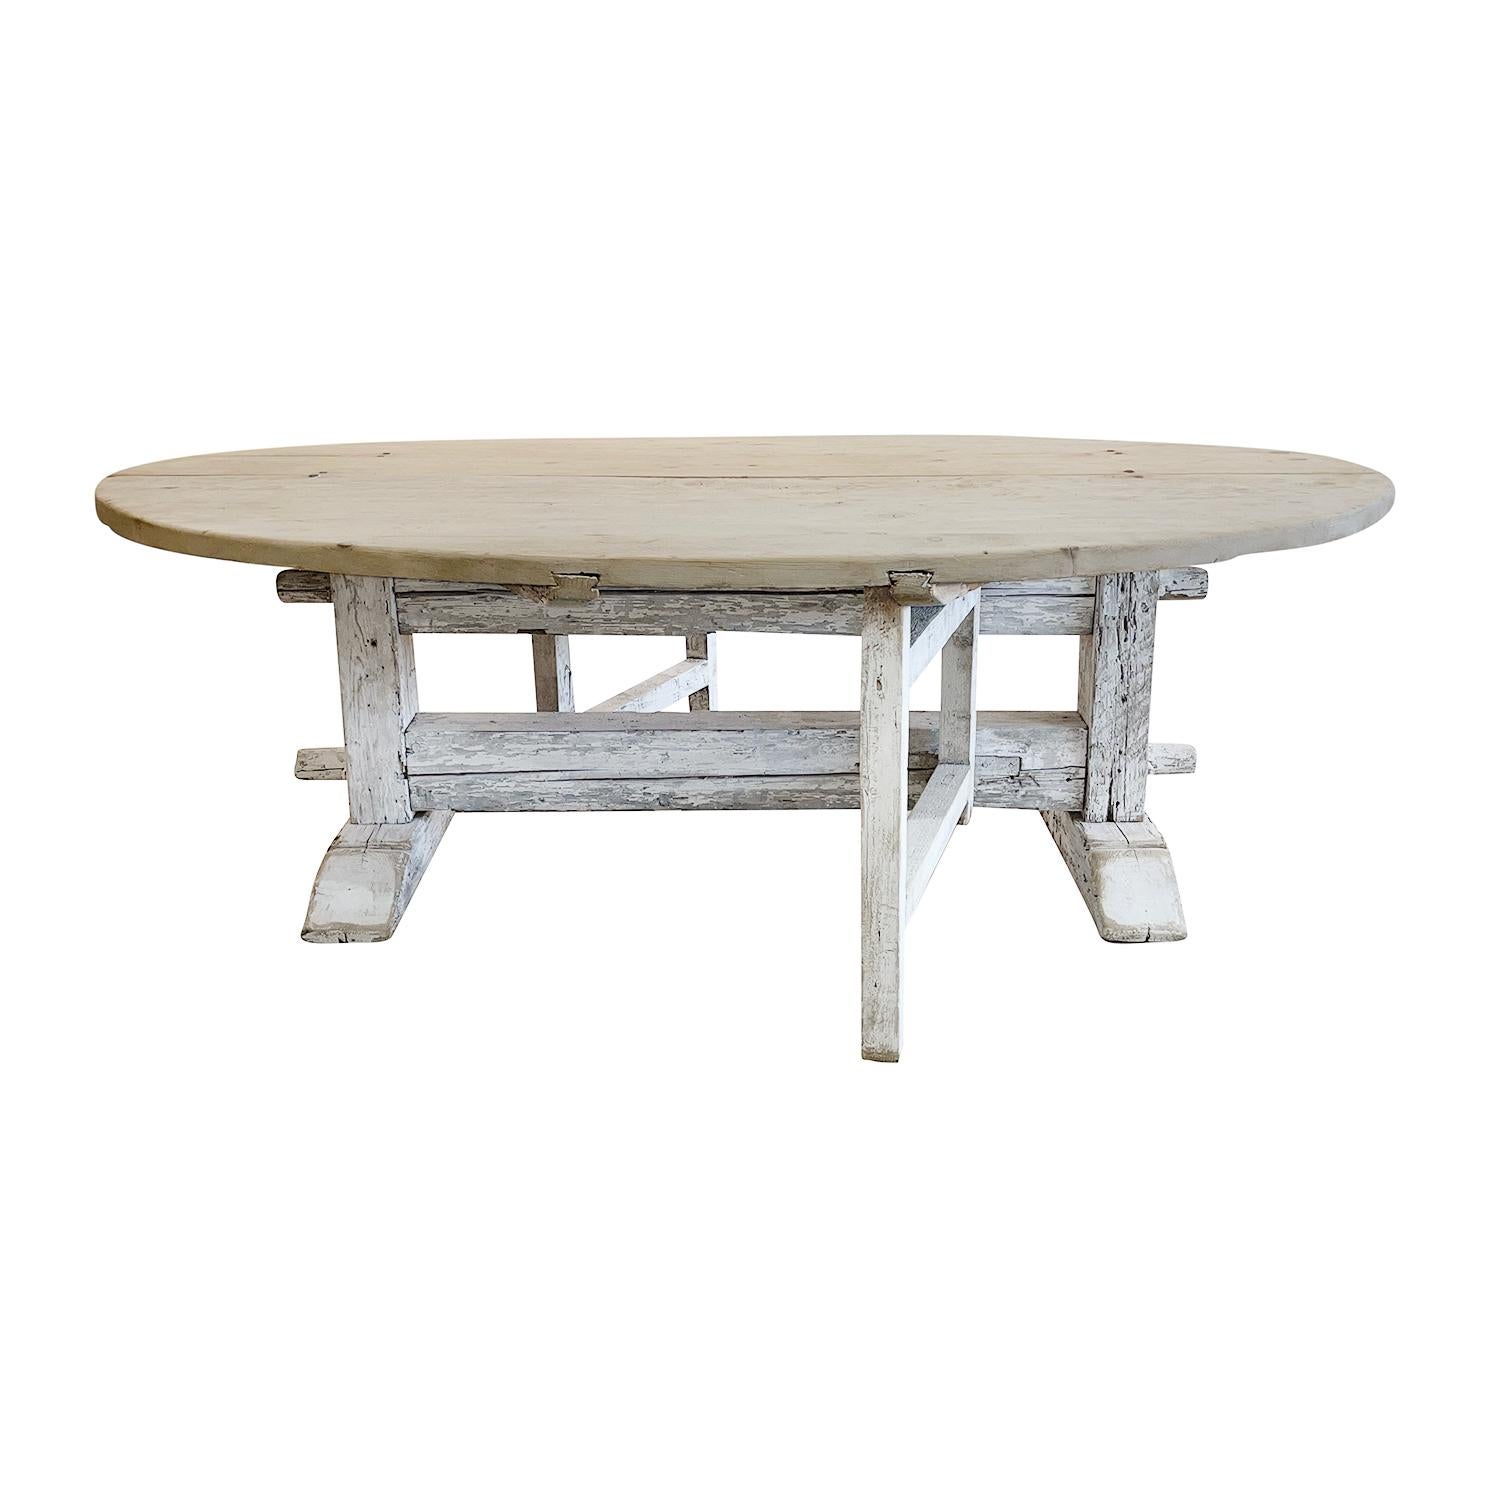 An antique grey white painted oval folding table with a massively constructed with trestle designed support, made of hand carved Pinewood, in good condition. This table seats eight. Wear consistent with age and use. Circa 1900, Italy.

Measures: